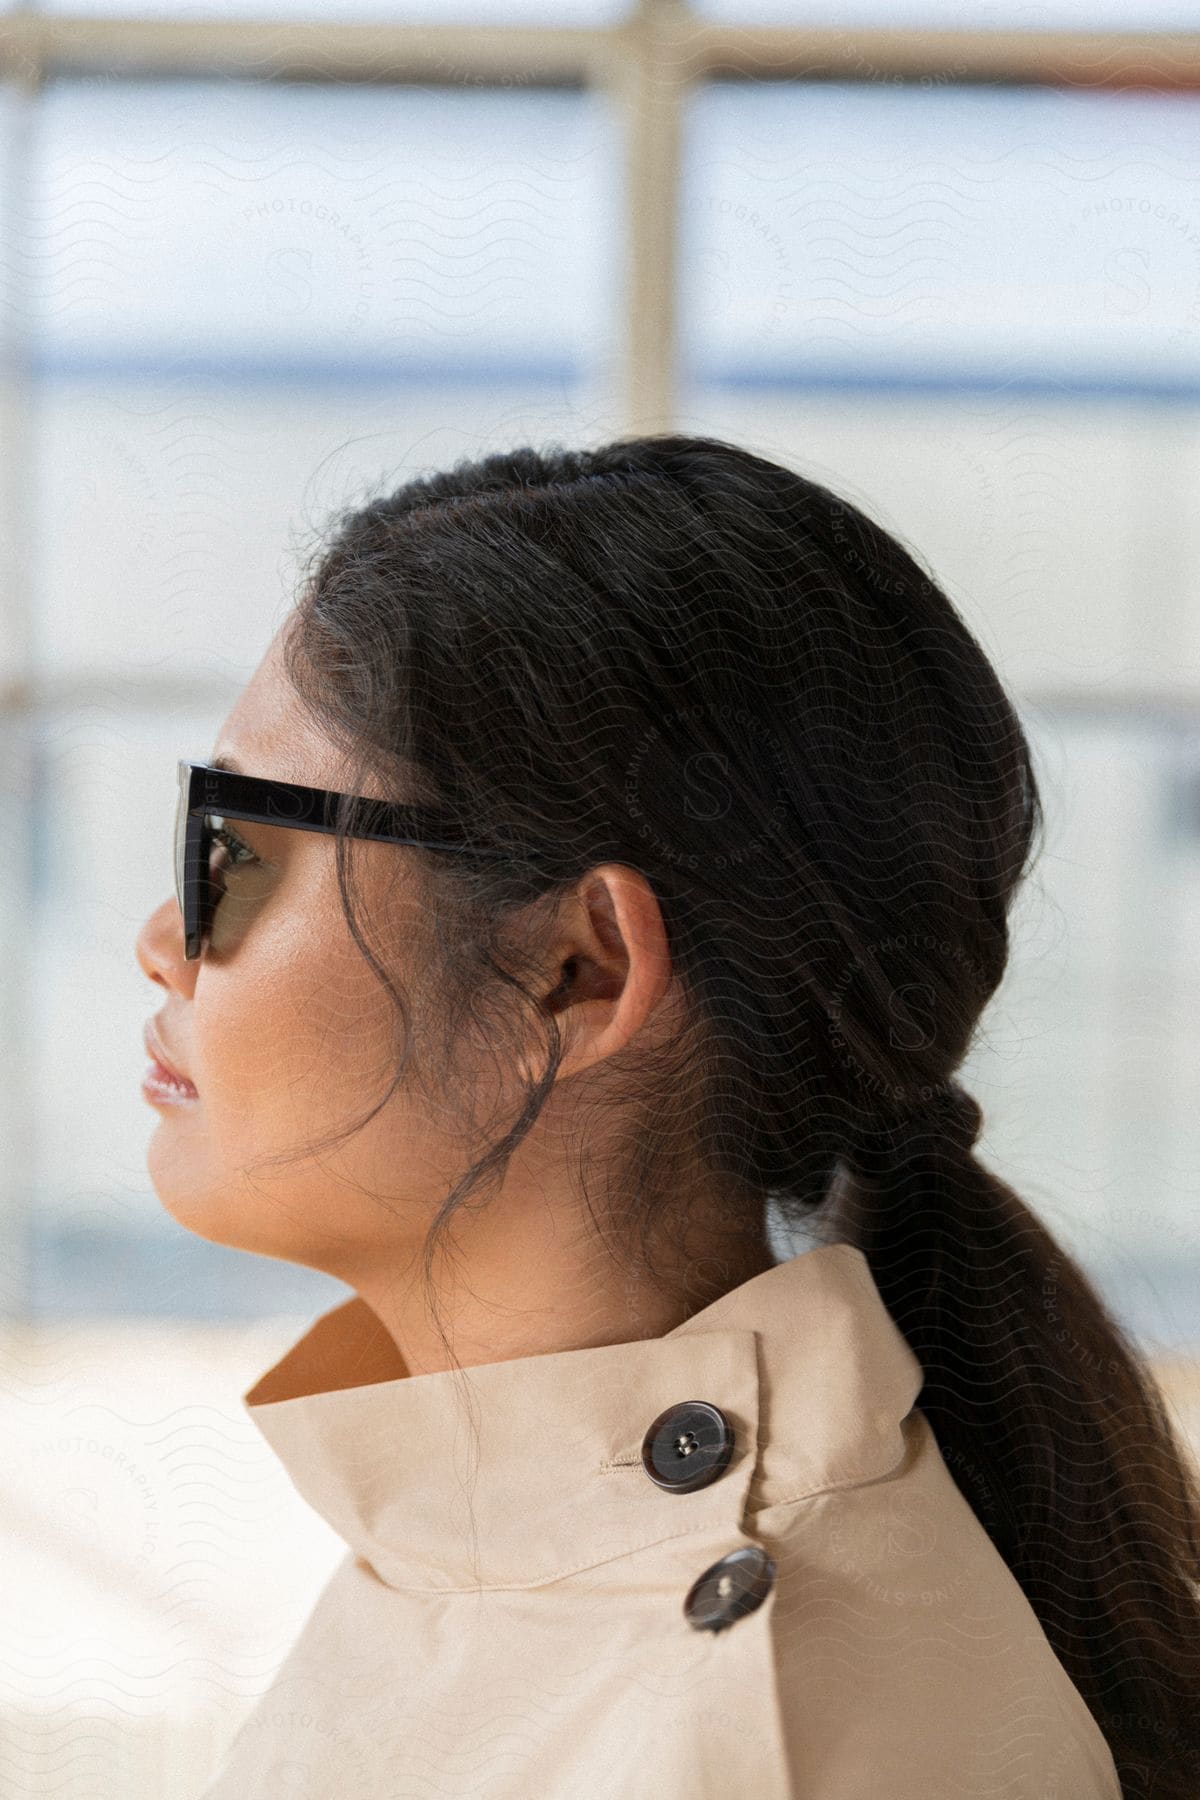 An asian woman with sunglasses, in profile.